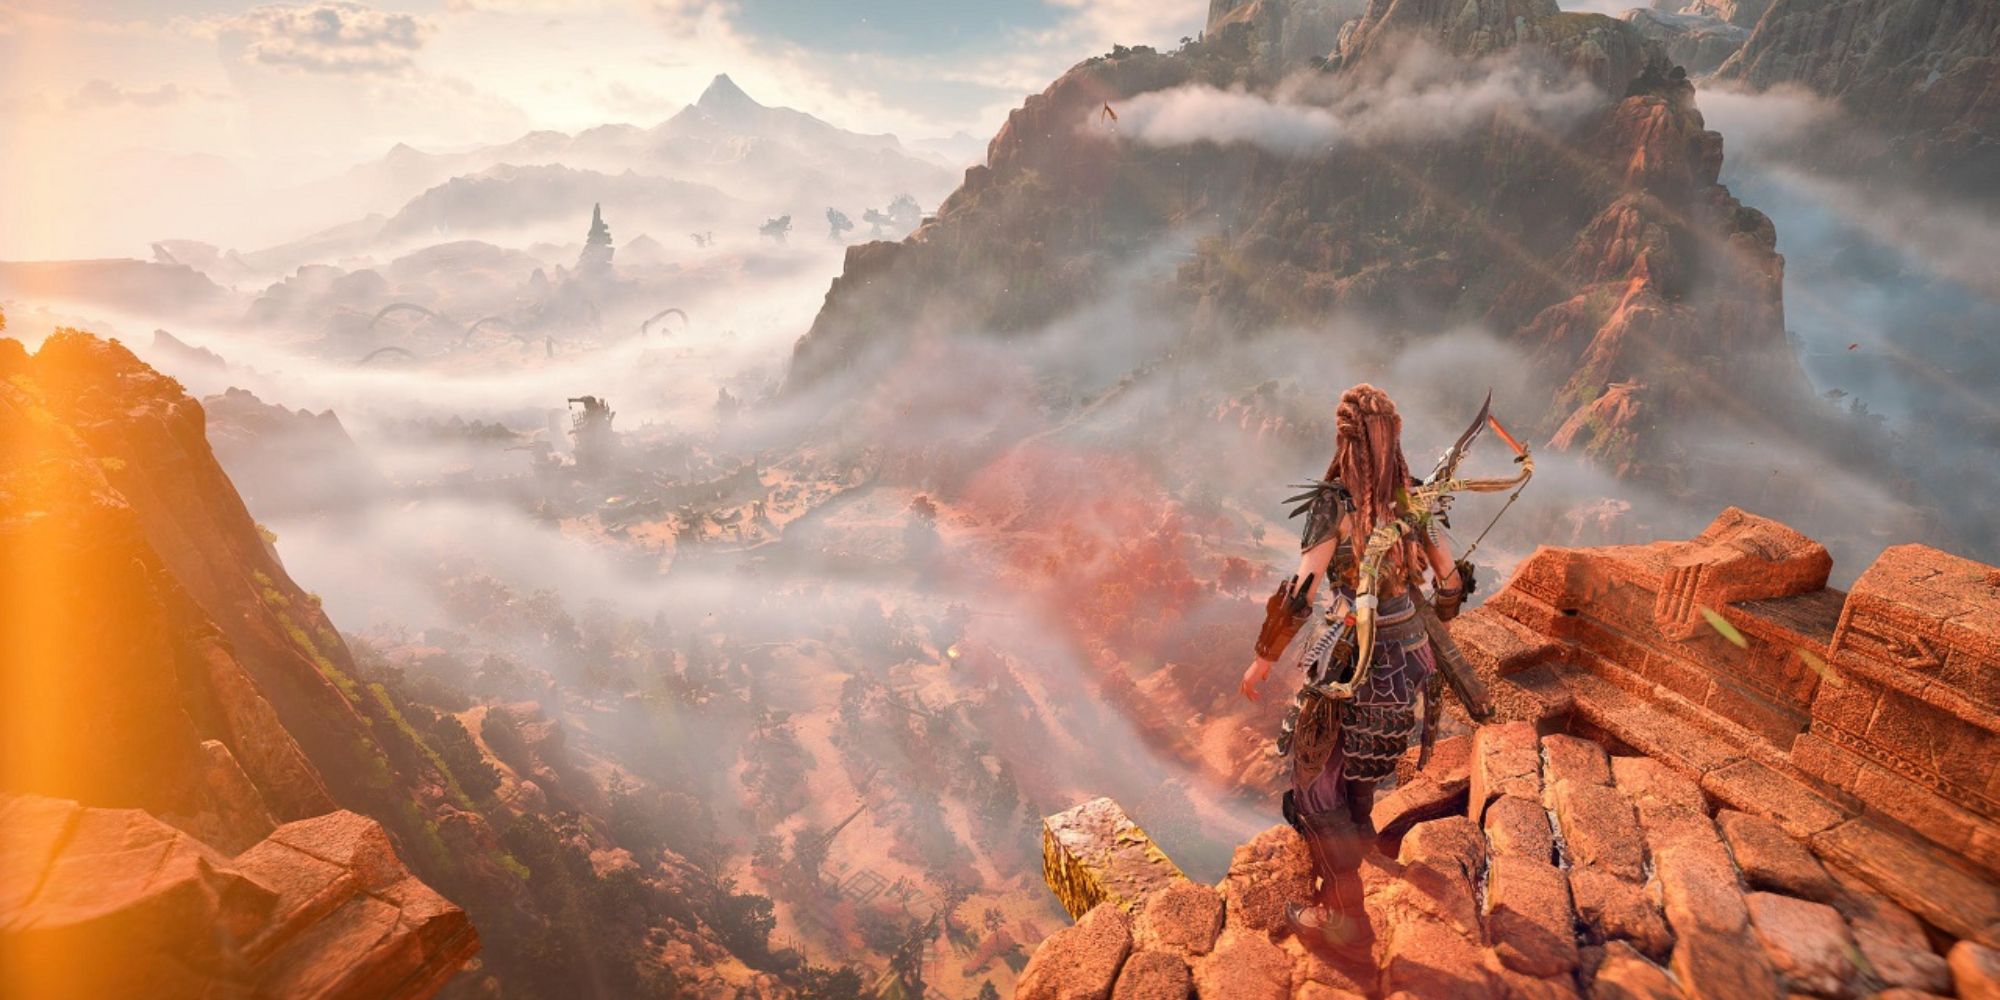 A screenshot from Horizon: Forbidden West shows Aloy at the top of a cliff overlooking the misty valley below